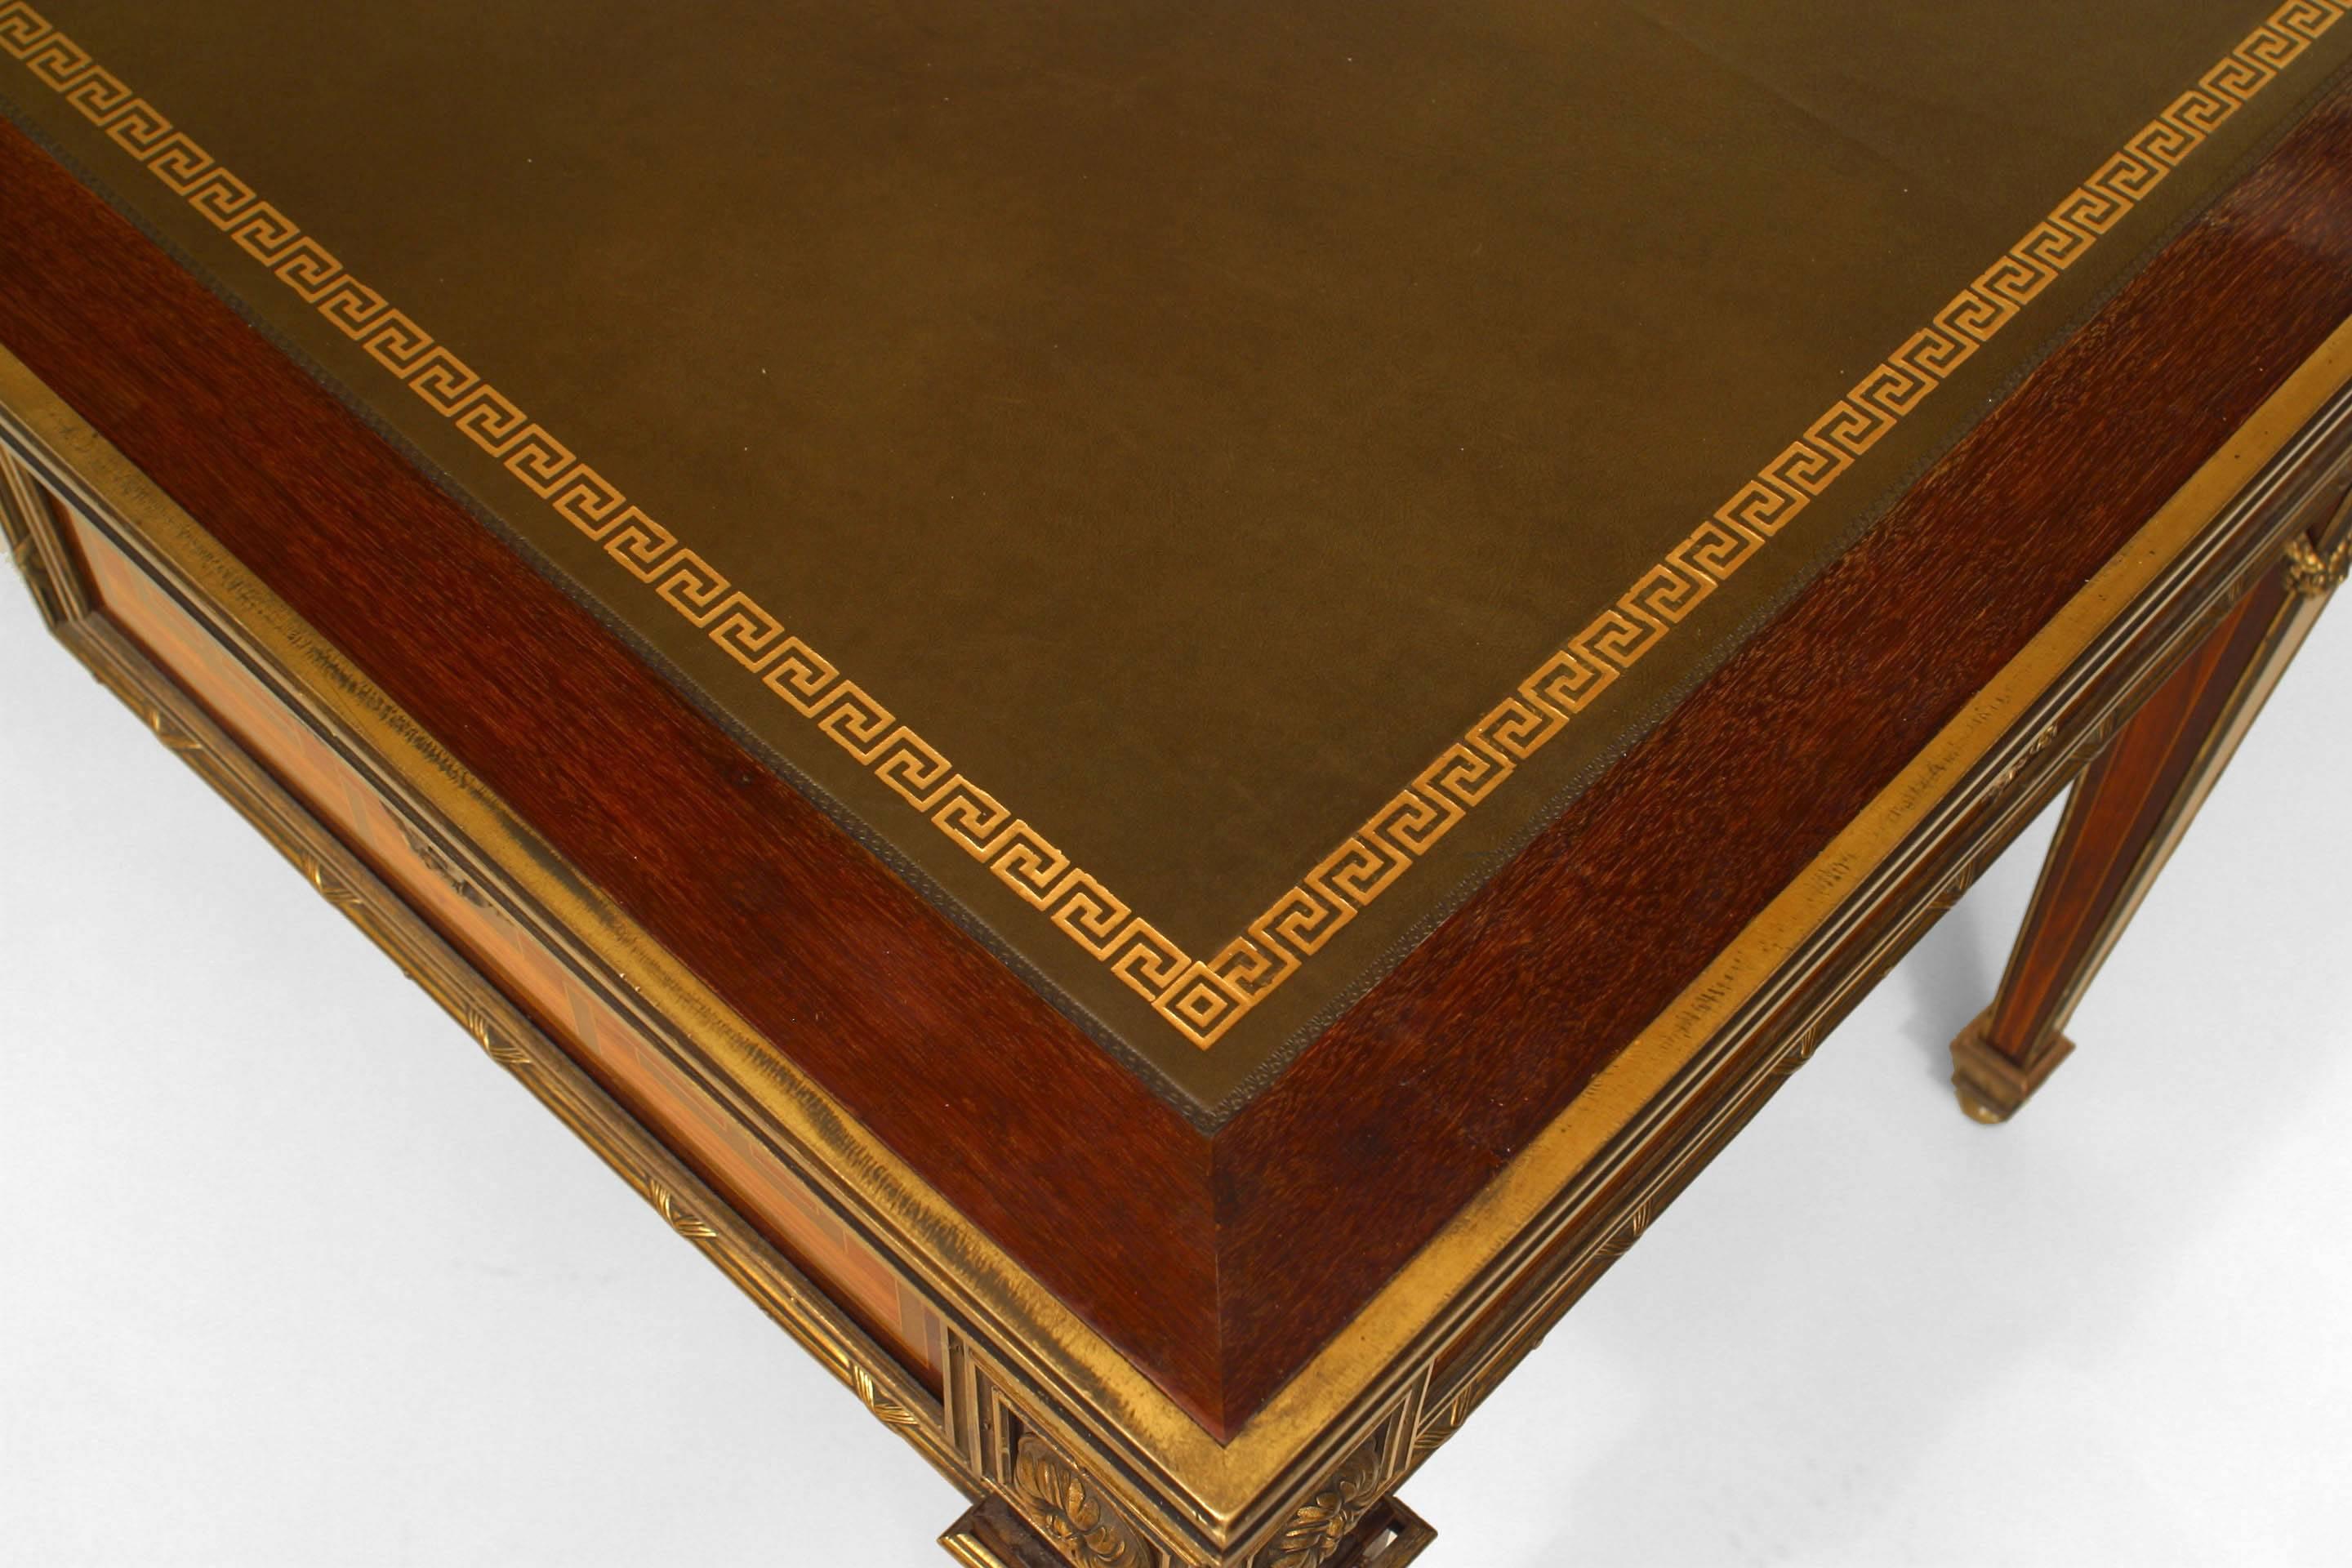 French Louis XVI style (English-19th Century) mahogany table desk with 3 drawers and various inlaid woods with bronze trim & swags on legs with a leather top (WROTHAM PARK)
